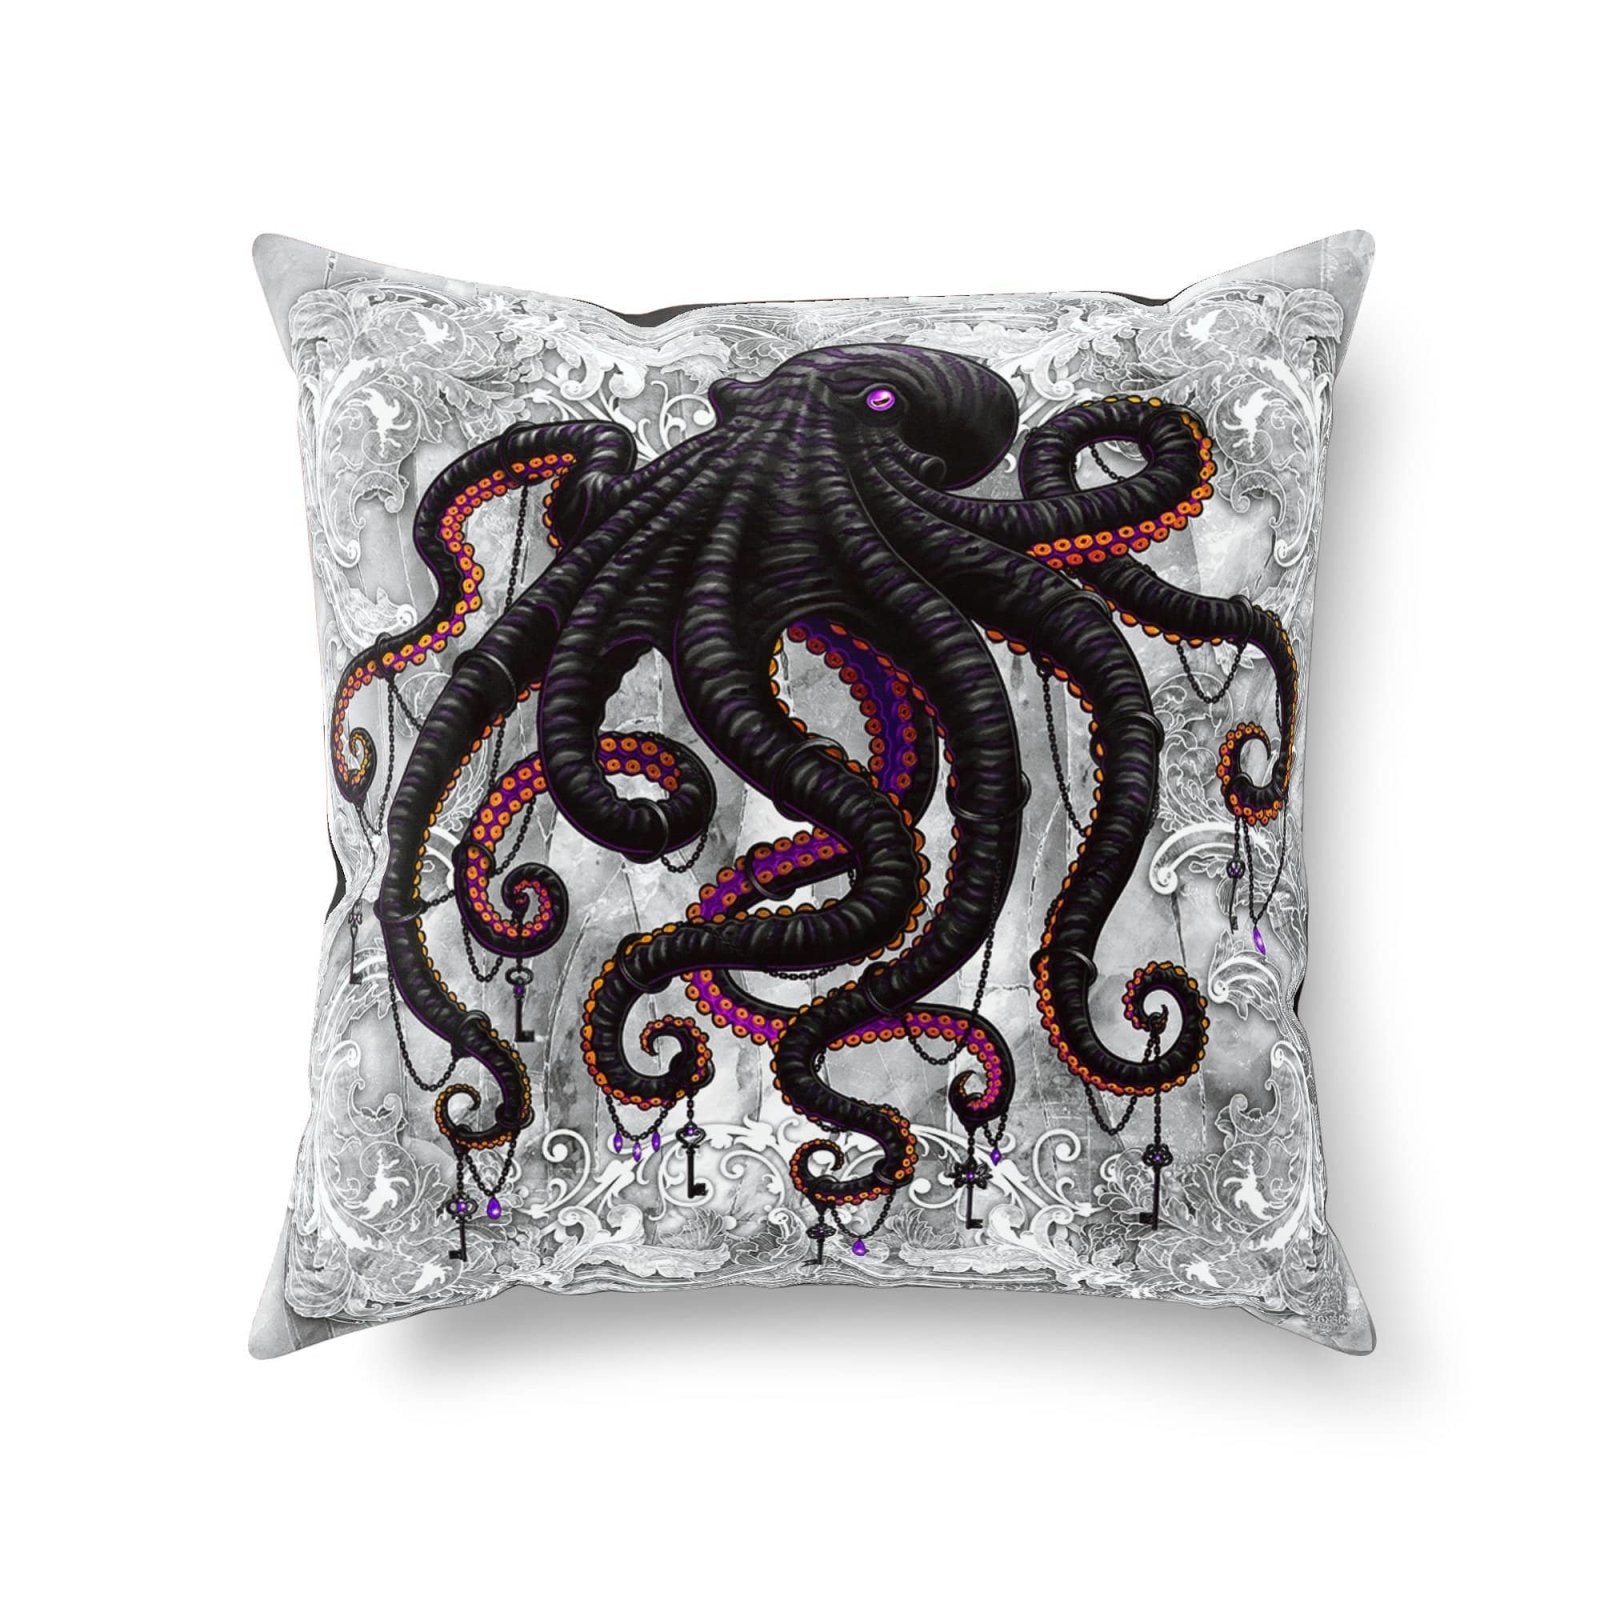 Beach Throw Pillow, Decorative Accent Cushion, Eclectic Room Decor, Alternative Home - White Goth Octopus - Abysm Internal